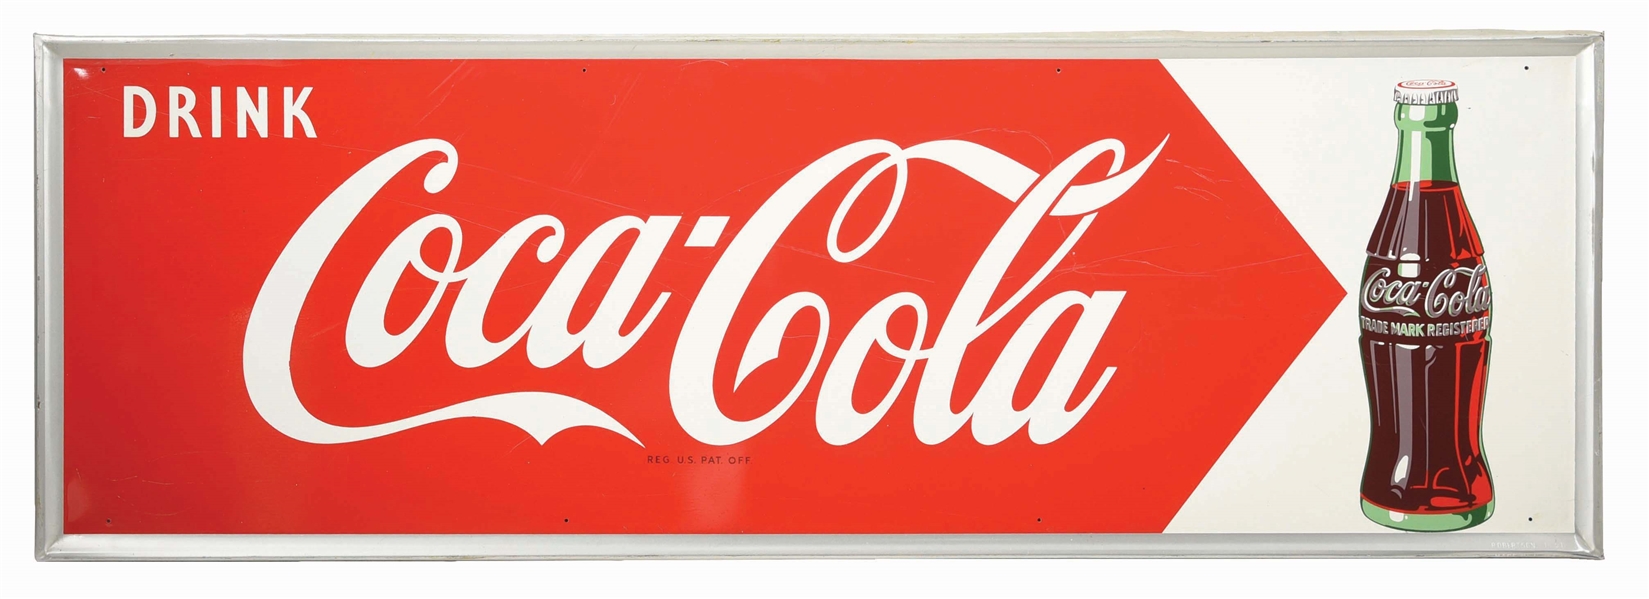 DRINK COCA COLA TIN SIGN W/ BOTTLE GRAPHIC & SELF FRAMED OUTER EDGE. 